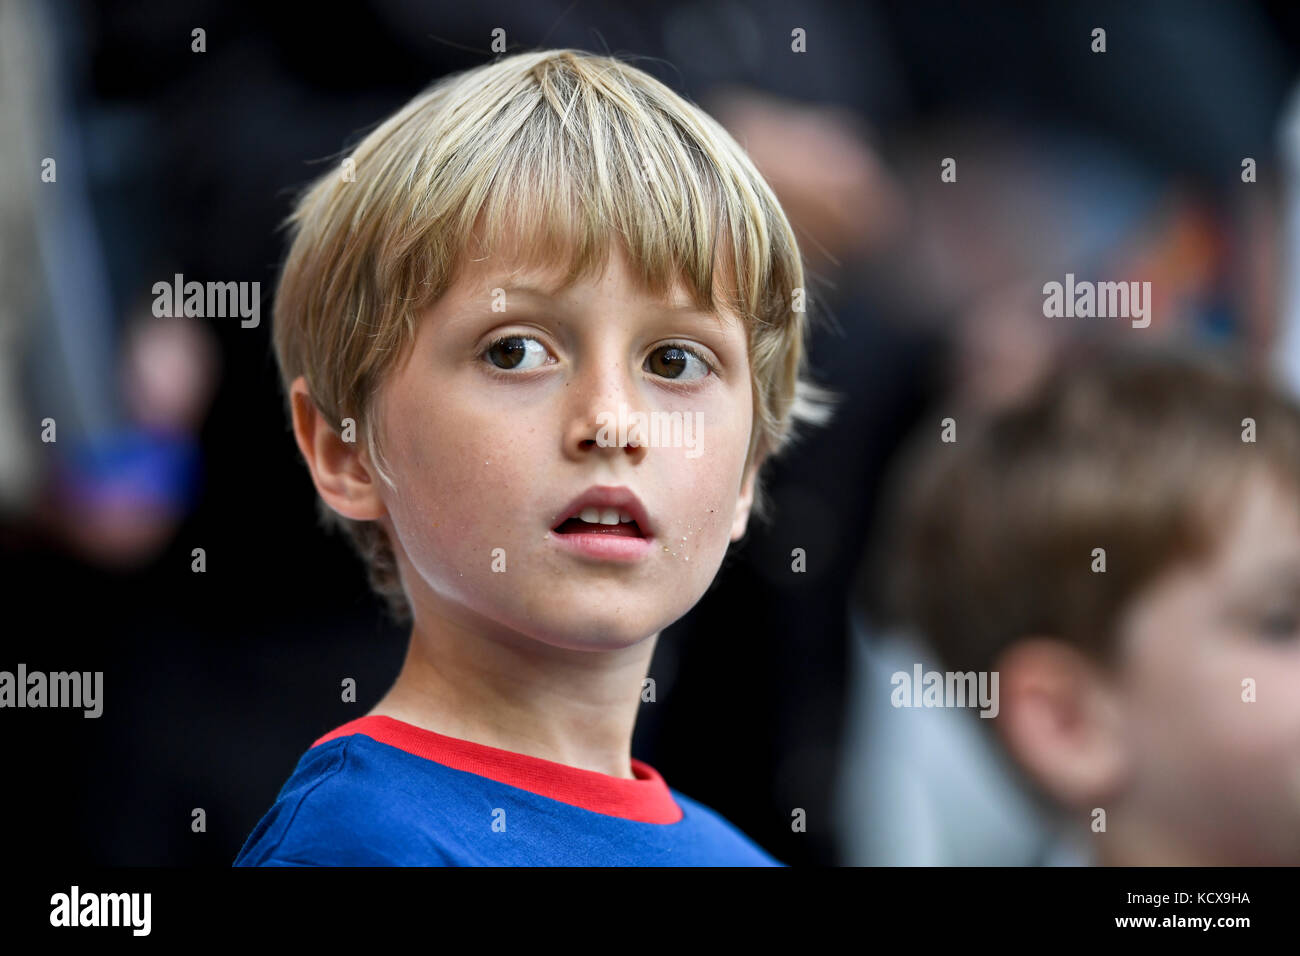 British boy looking to a football match Stock Photo